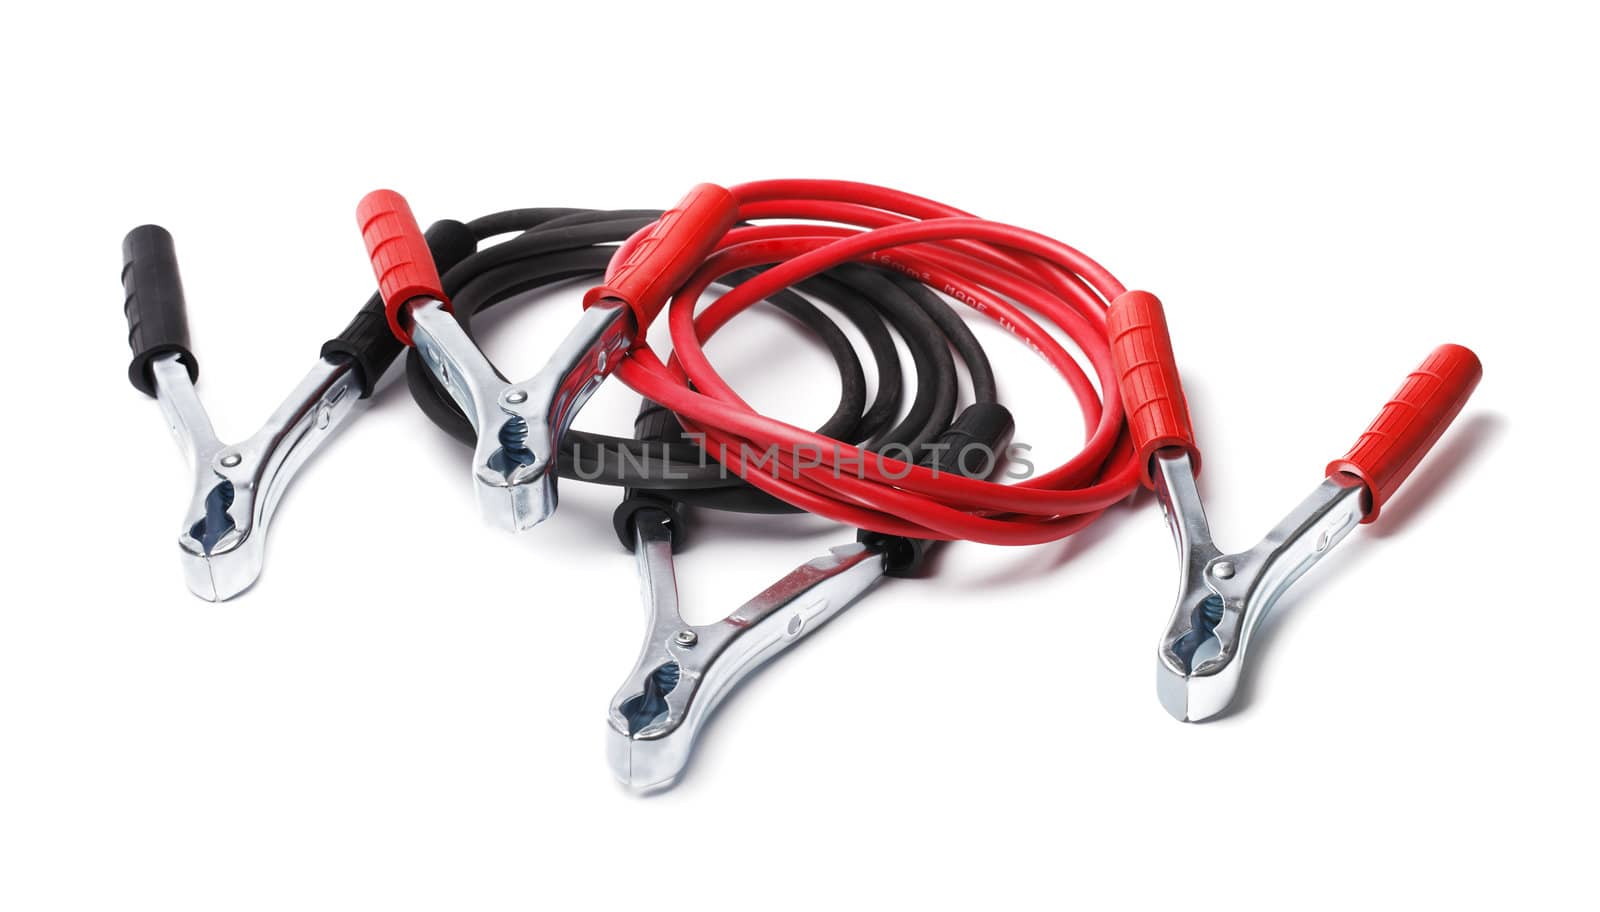 A Set of jumper cables aka jump start cables isolated on white with natural shadows.